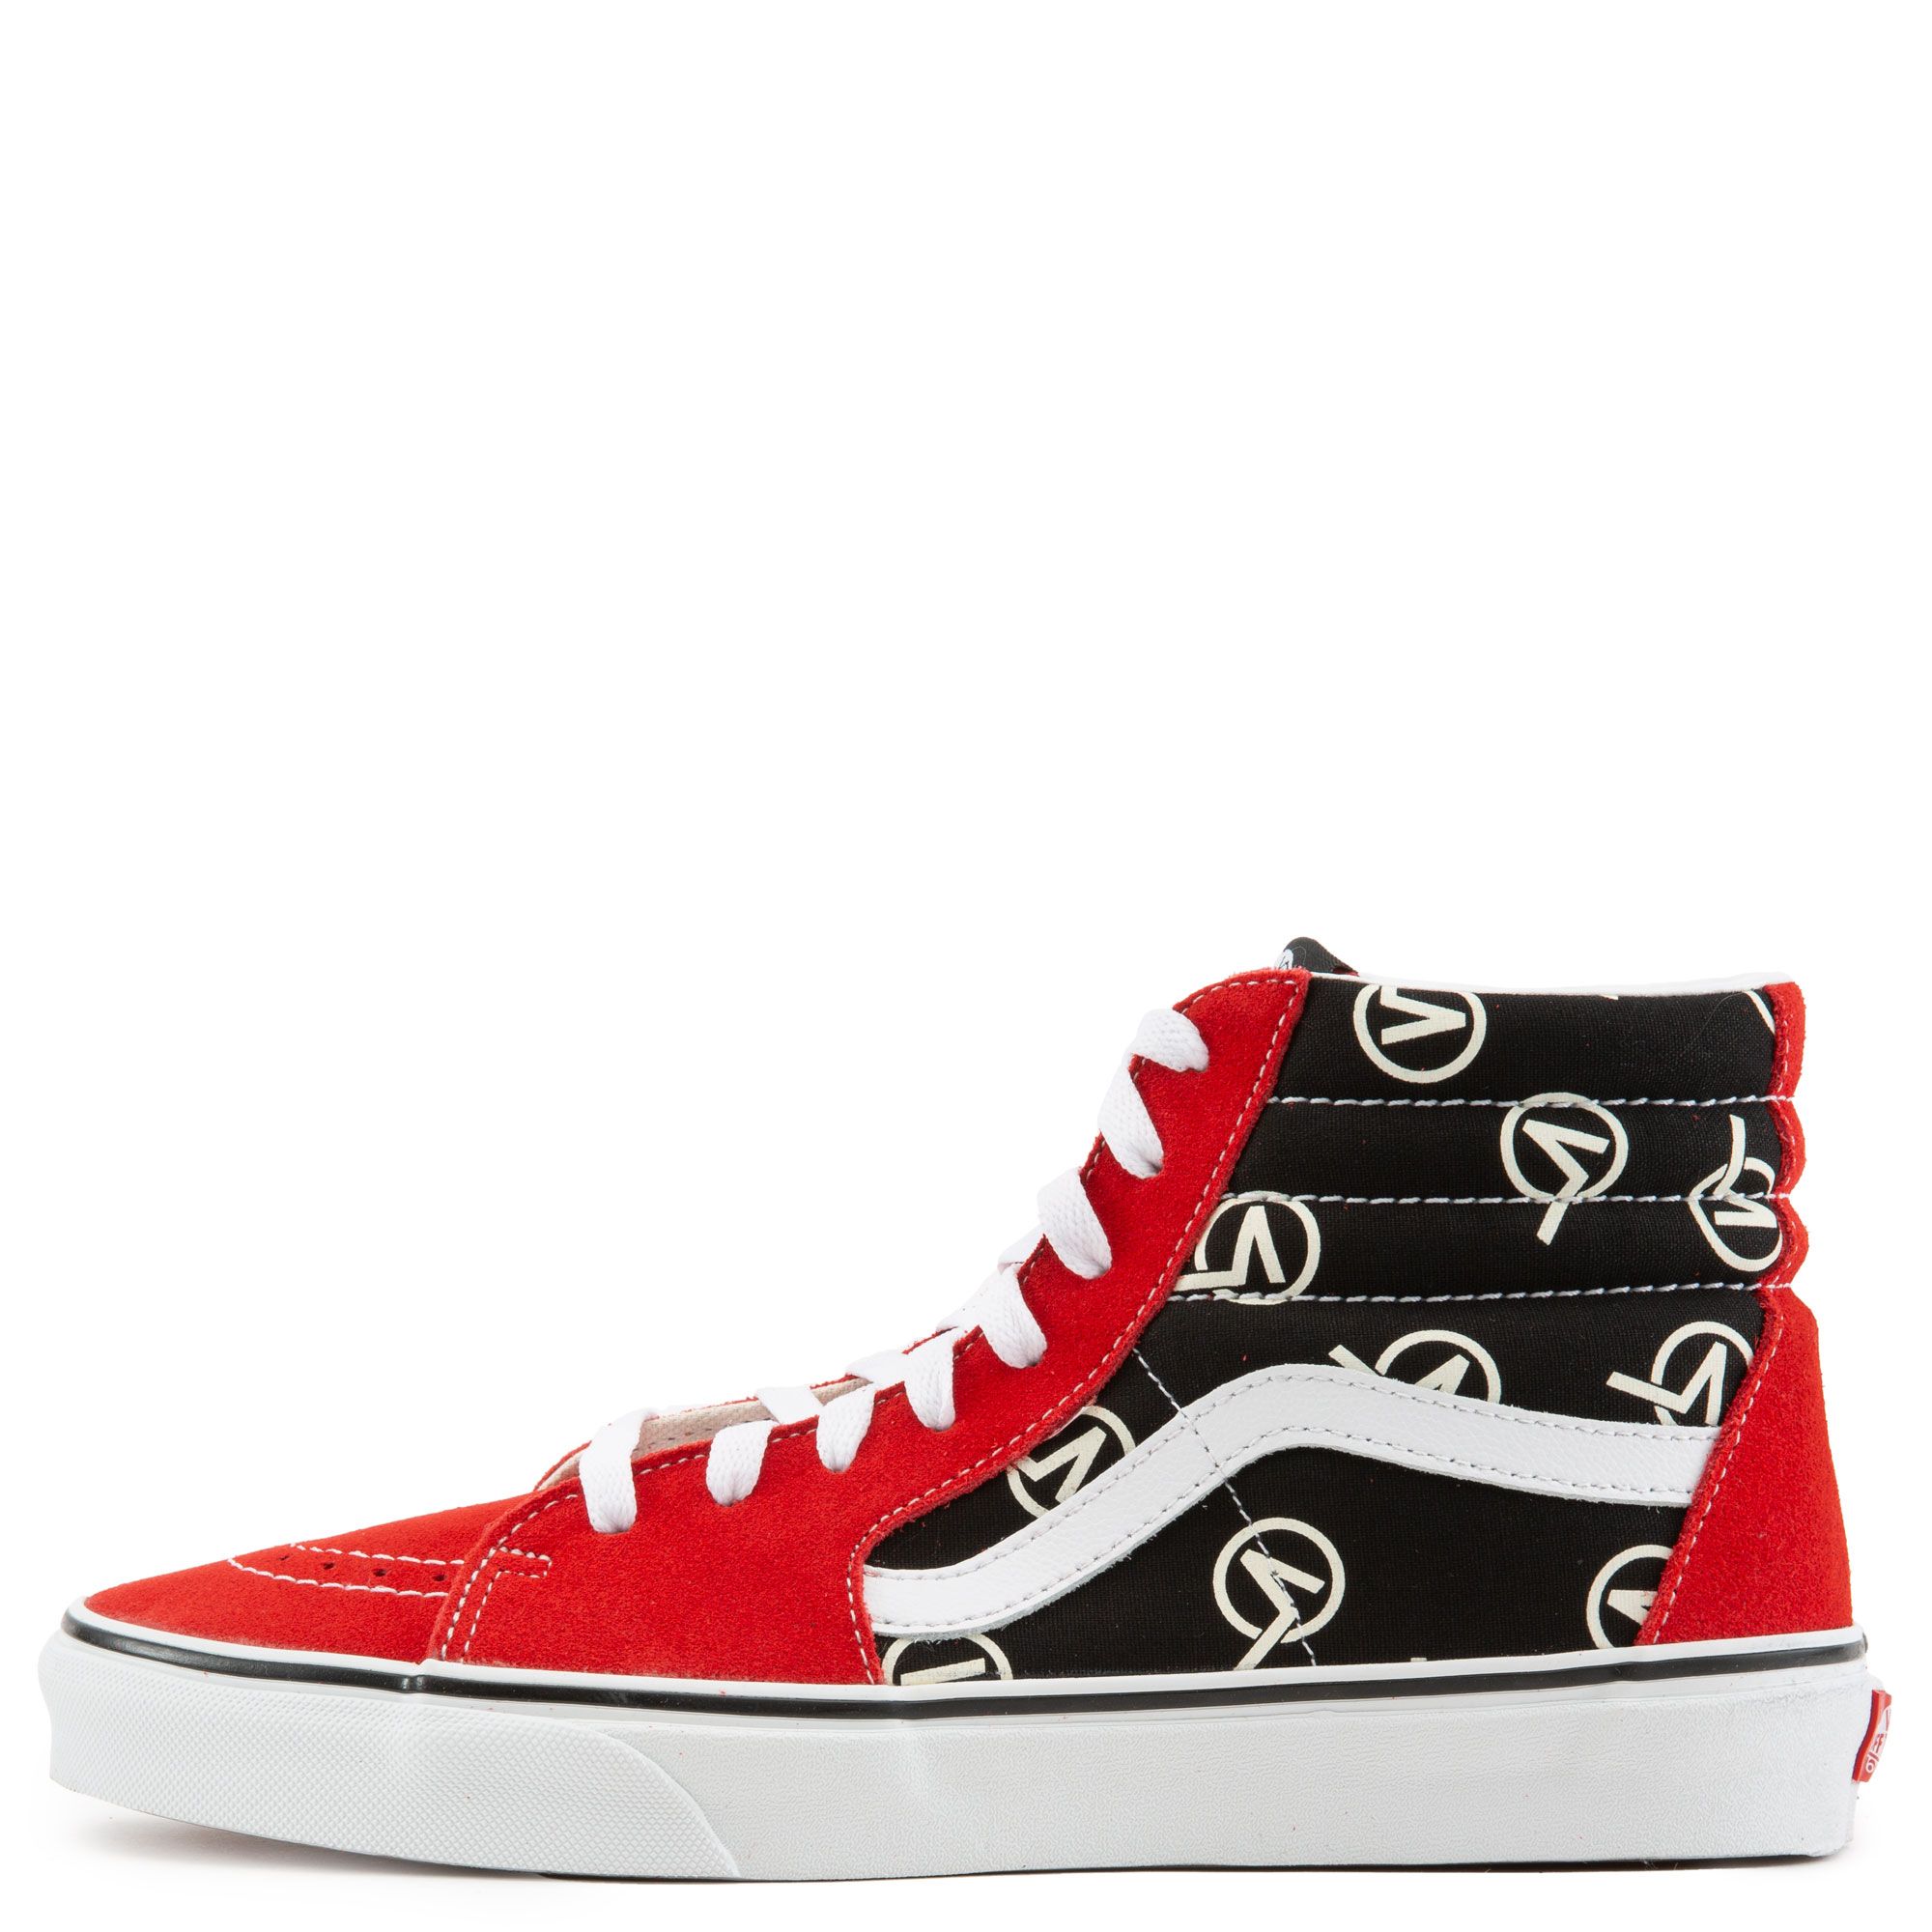 Vans, Shoes, New In Box Vans Hightop Supreme Skater Shoes Sneakers Women  Red White Checkered